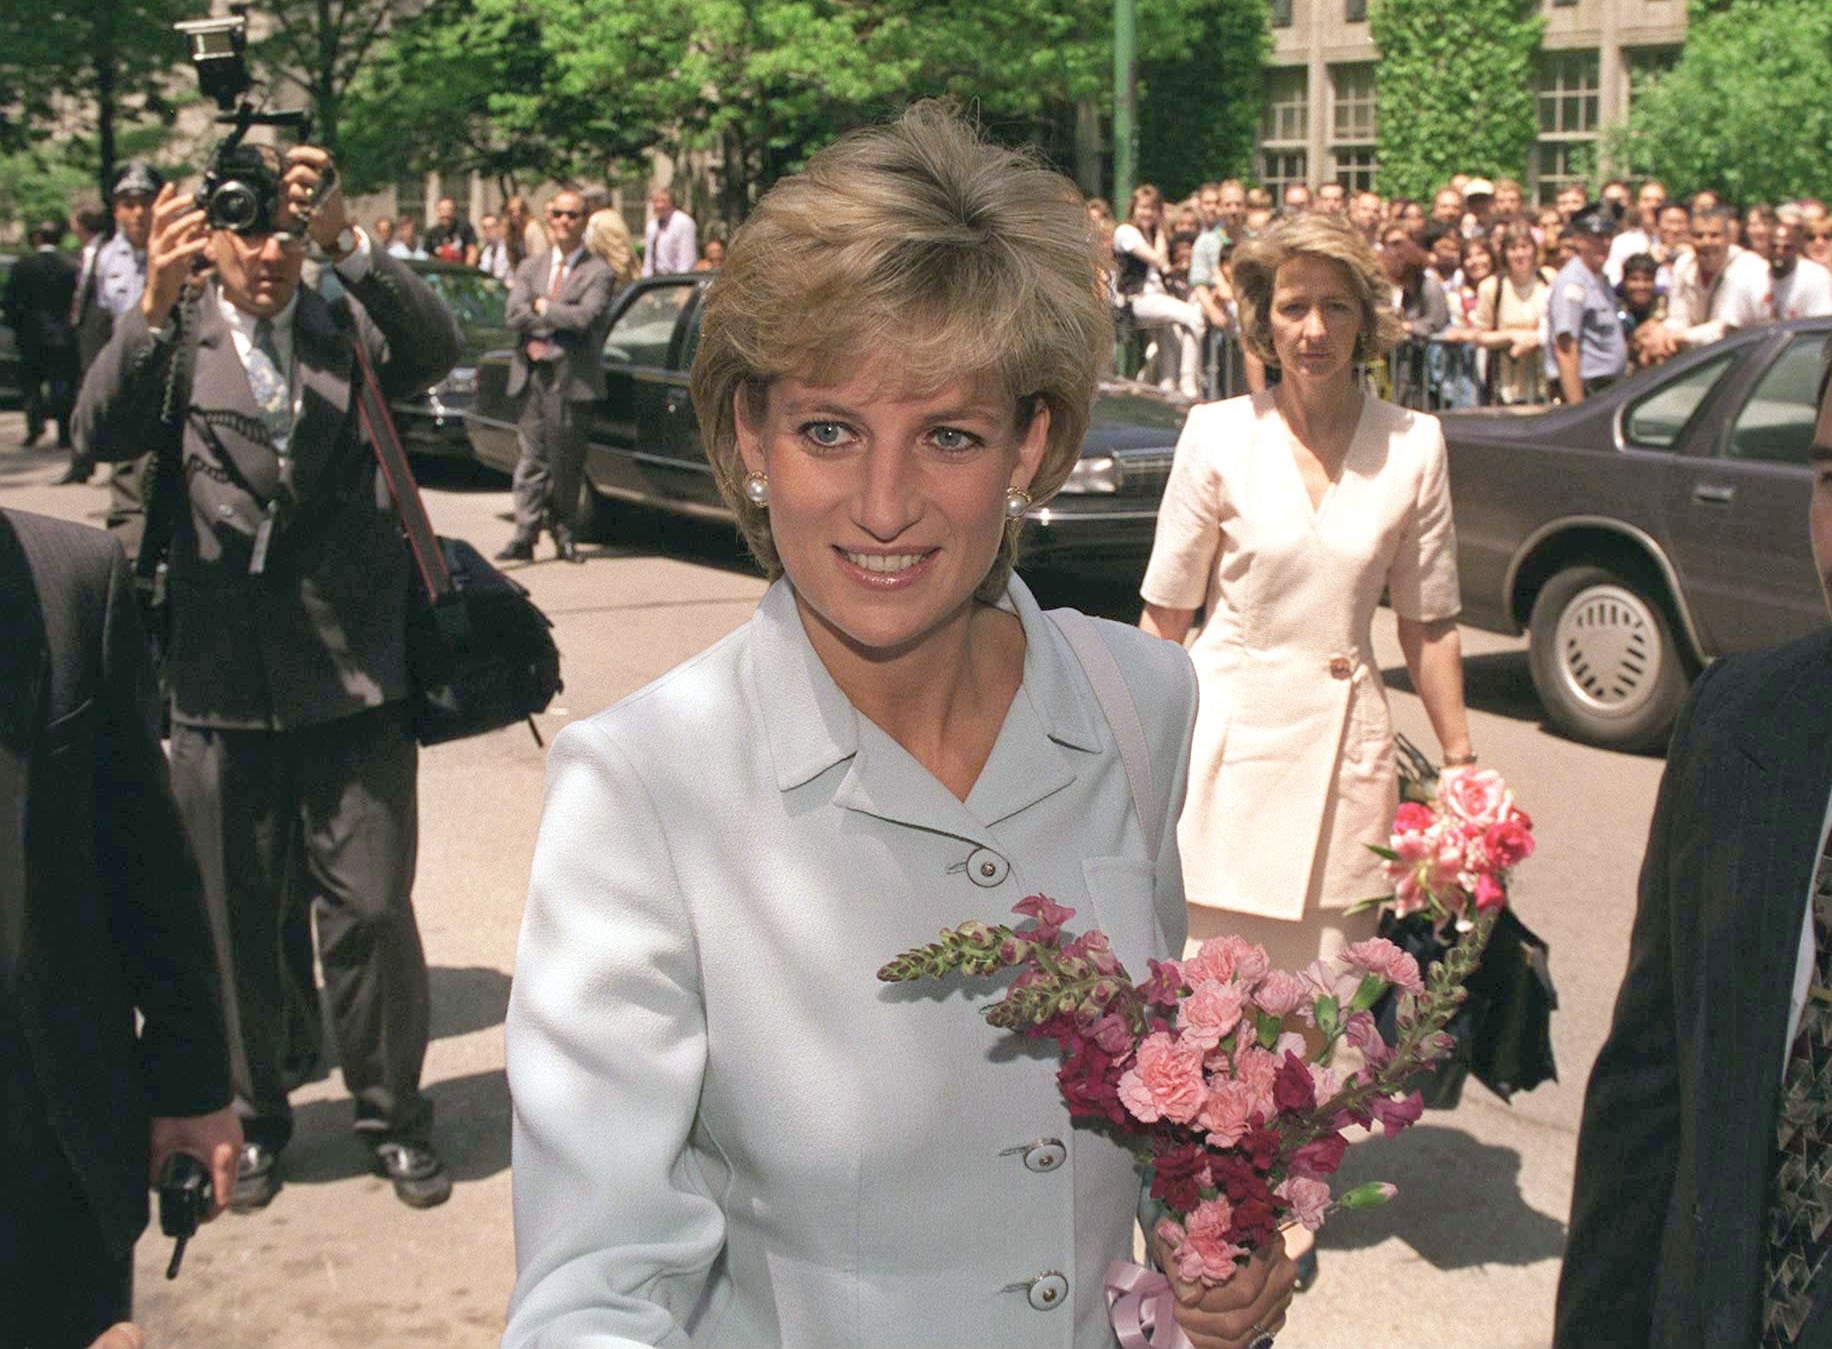 Never-before-seen footage has been shared of Princess Diana who is seen here visiting Cook County Hospital in Chicago